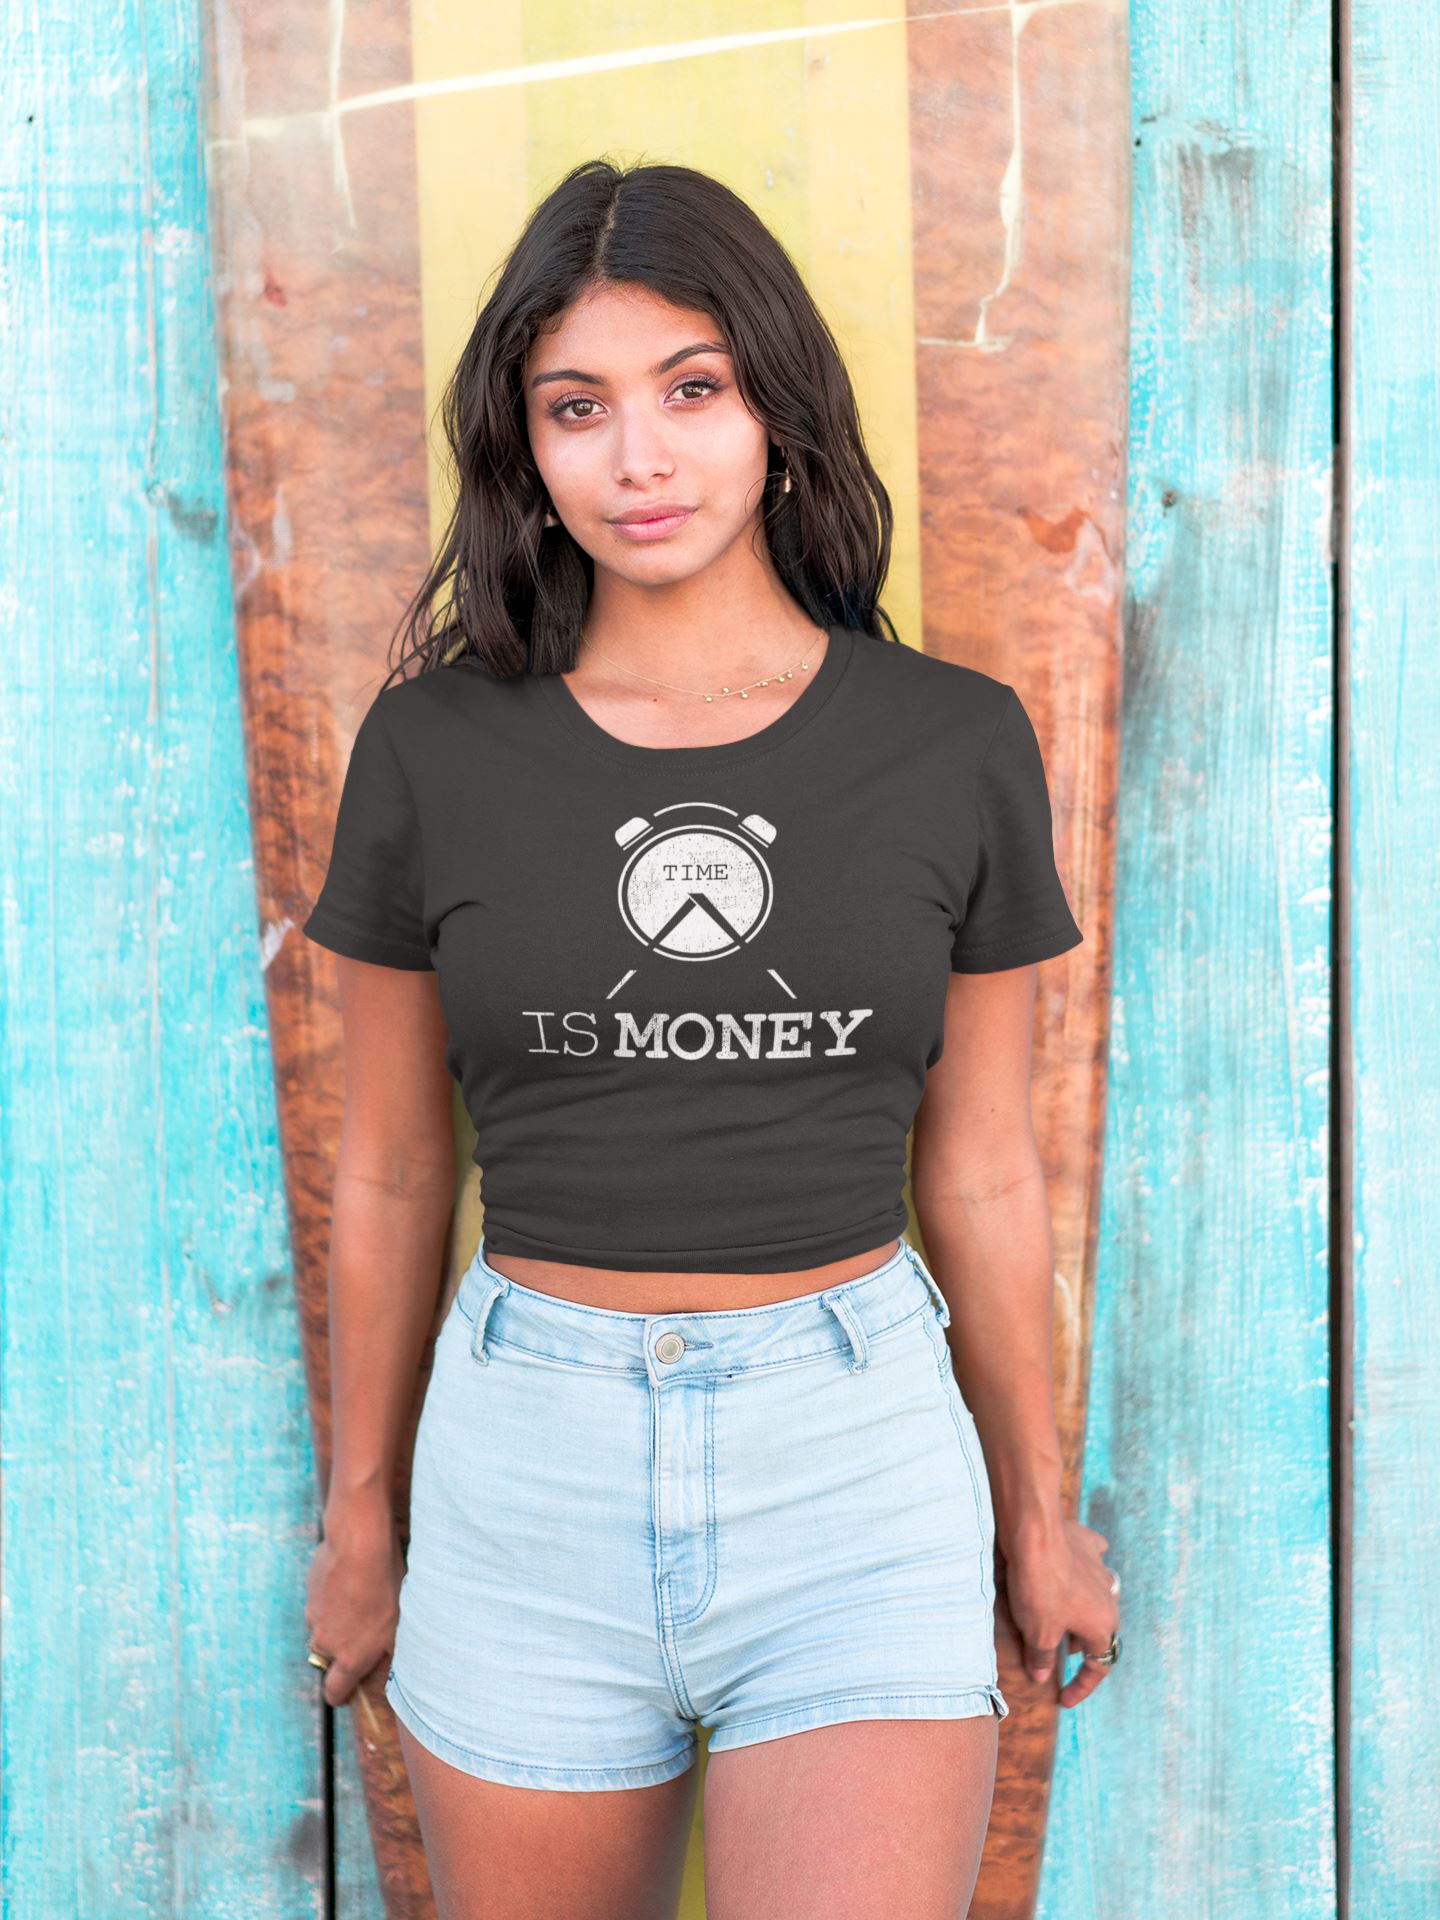 Time is Money Exclusive Black T Shirt for Men and Women freeshipping - Catch My Drift India